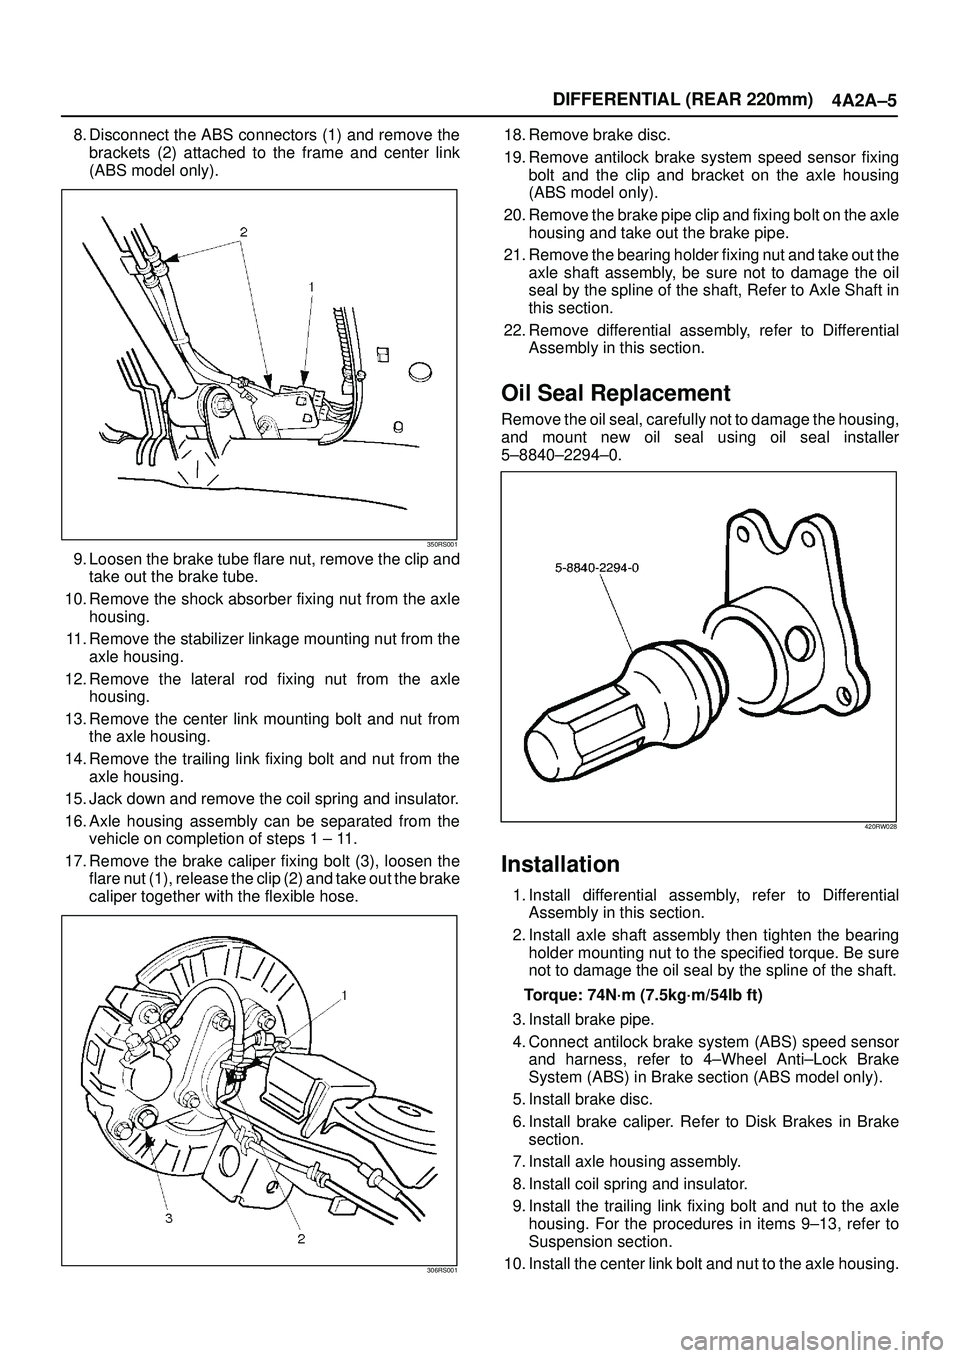 ISUZU TROOPER 1998  Service Repair Manual DIFFERENTIAL (REAR 220mm)
4A2A±5
8. Disconnect the ABS connectors (1) and remove the
brackets (2) attached to the frame and center link
(ABS model only).
350RS001
9. Loosen the brake tube flare nut, 